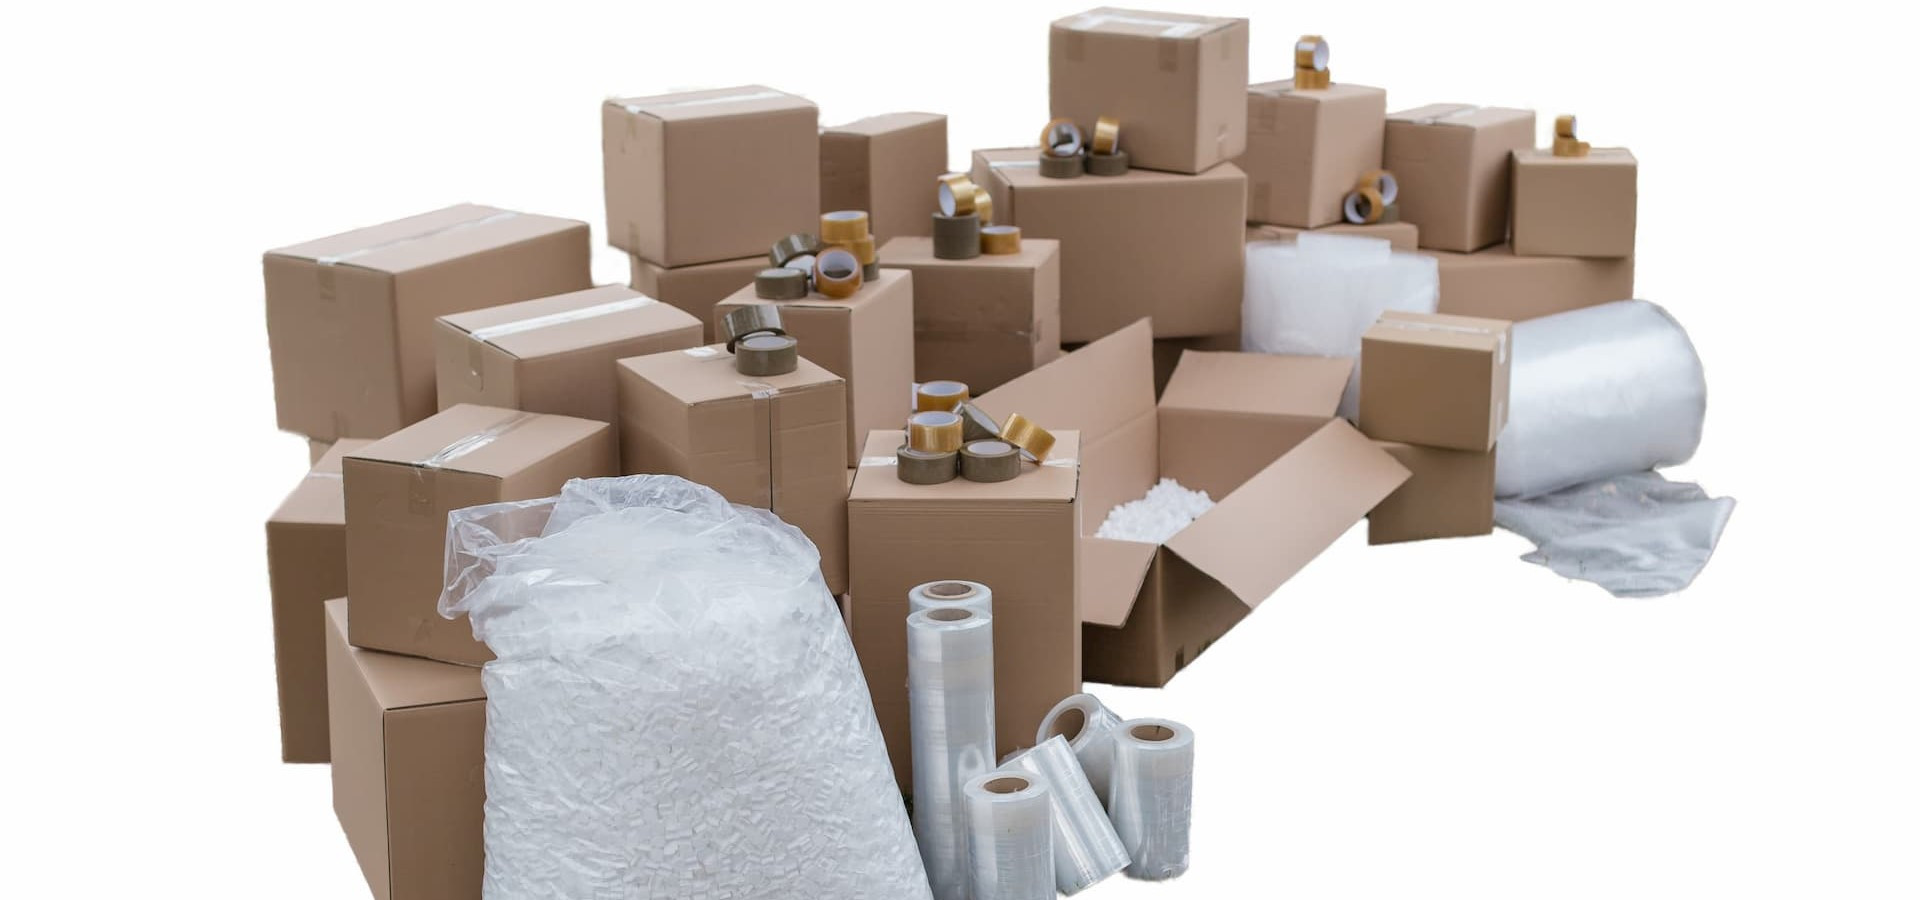 Where to buy packing supplies for moving?